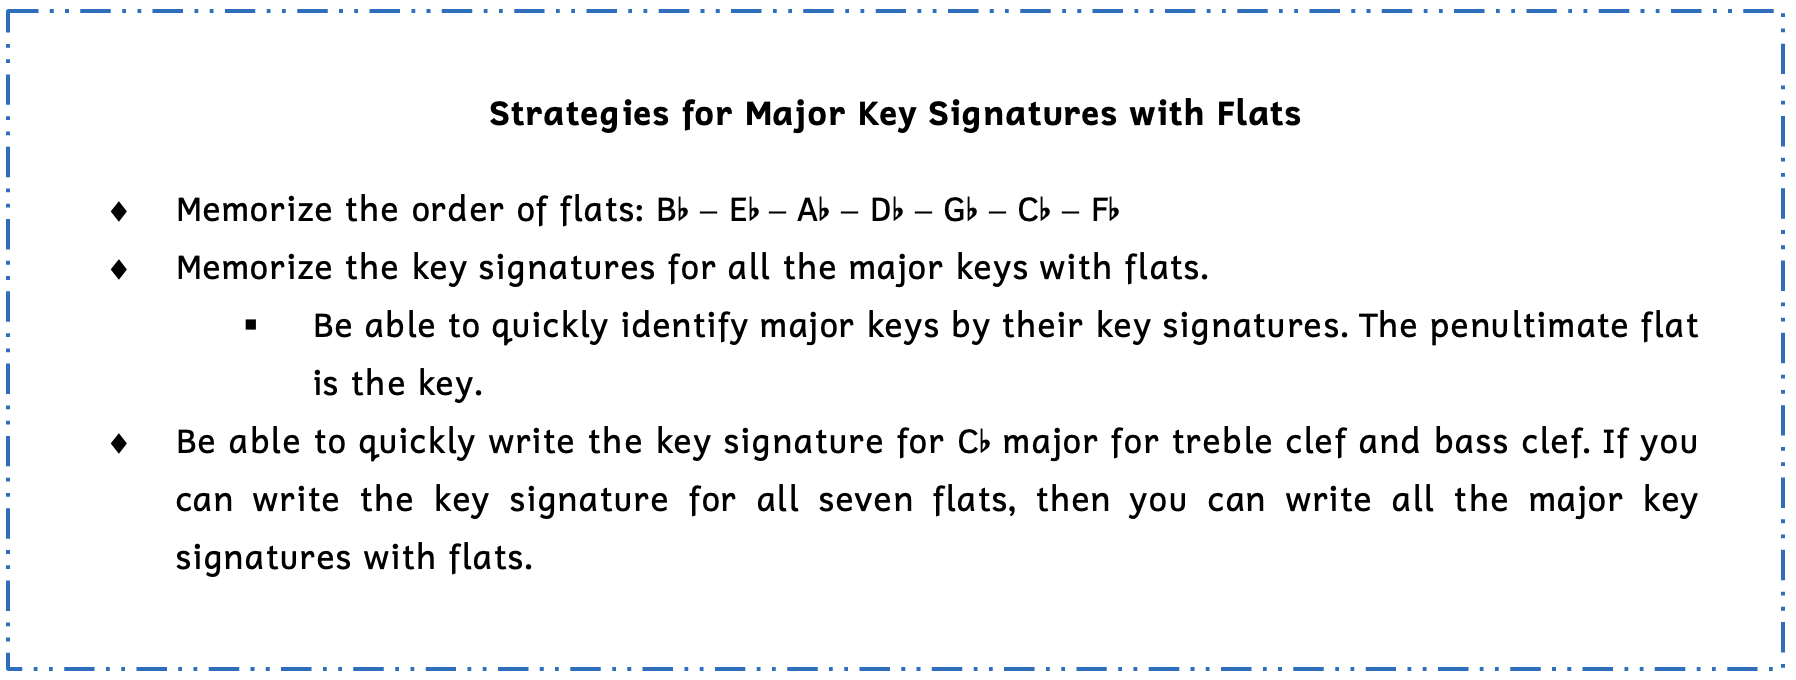 Summary box of strategies for major key signatures with flats. First, memorize the order of flats: B-flat, E-flat, A-flat, D-flat, G-flat, C-flat, and F-flat. Second, memorize the key signature for all the major keys with flats. Be able to quickly identify major keys by their key signatures. The penultimate flat is the key. Finally, be able to quickly write the key signature for C-flat major for treble clef and bass clef. If you can write the key signature for all seven flats, then you can write all the major key signatures with flats.